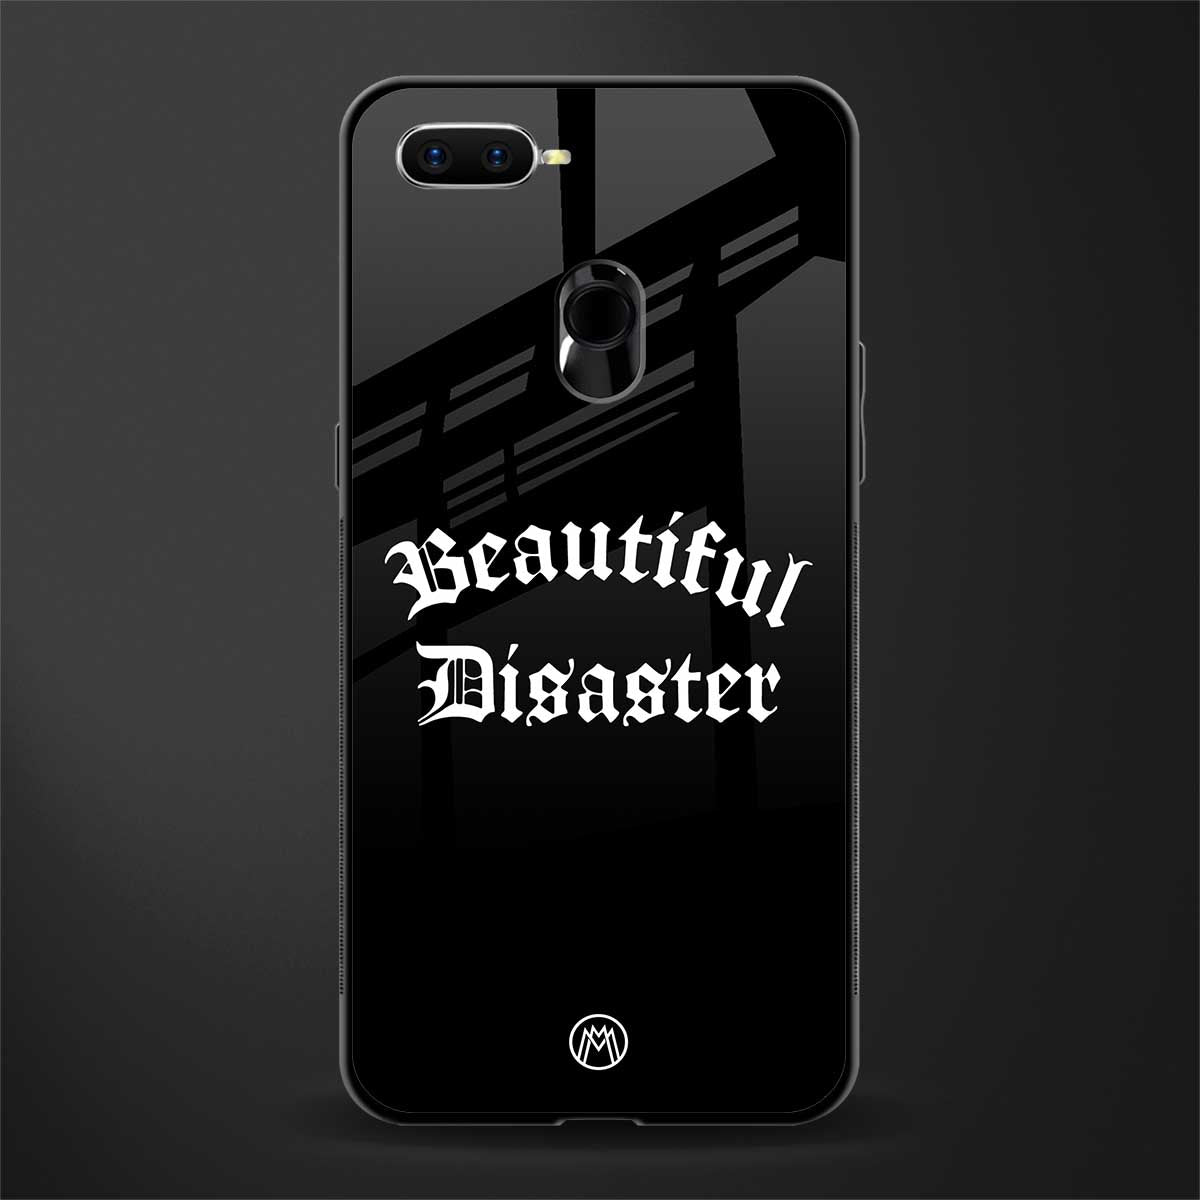 beautiful disaster glass case for oppo a7 image